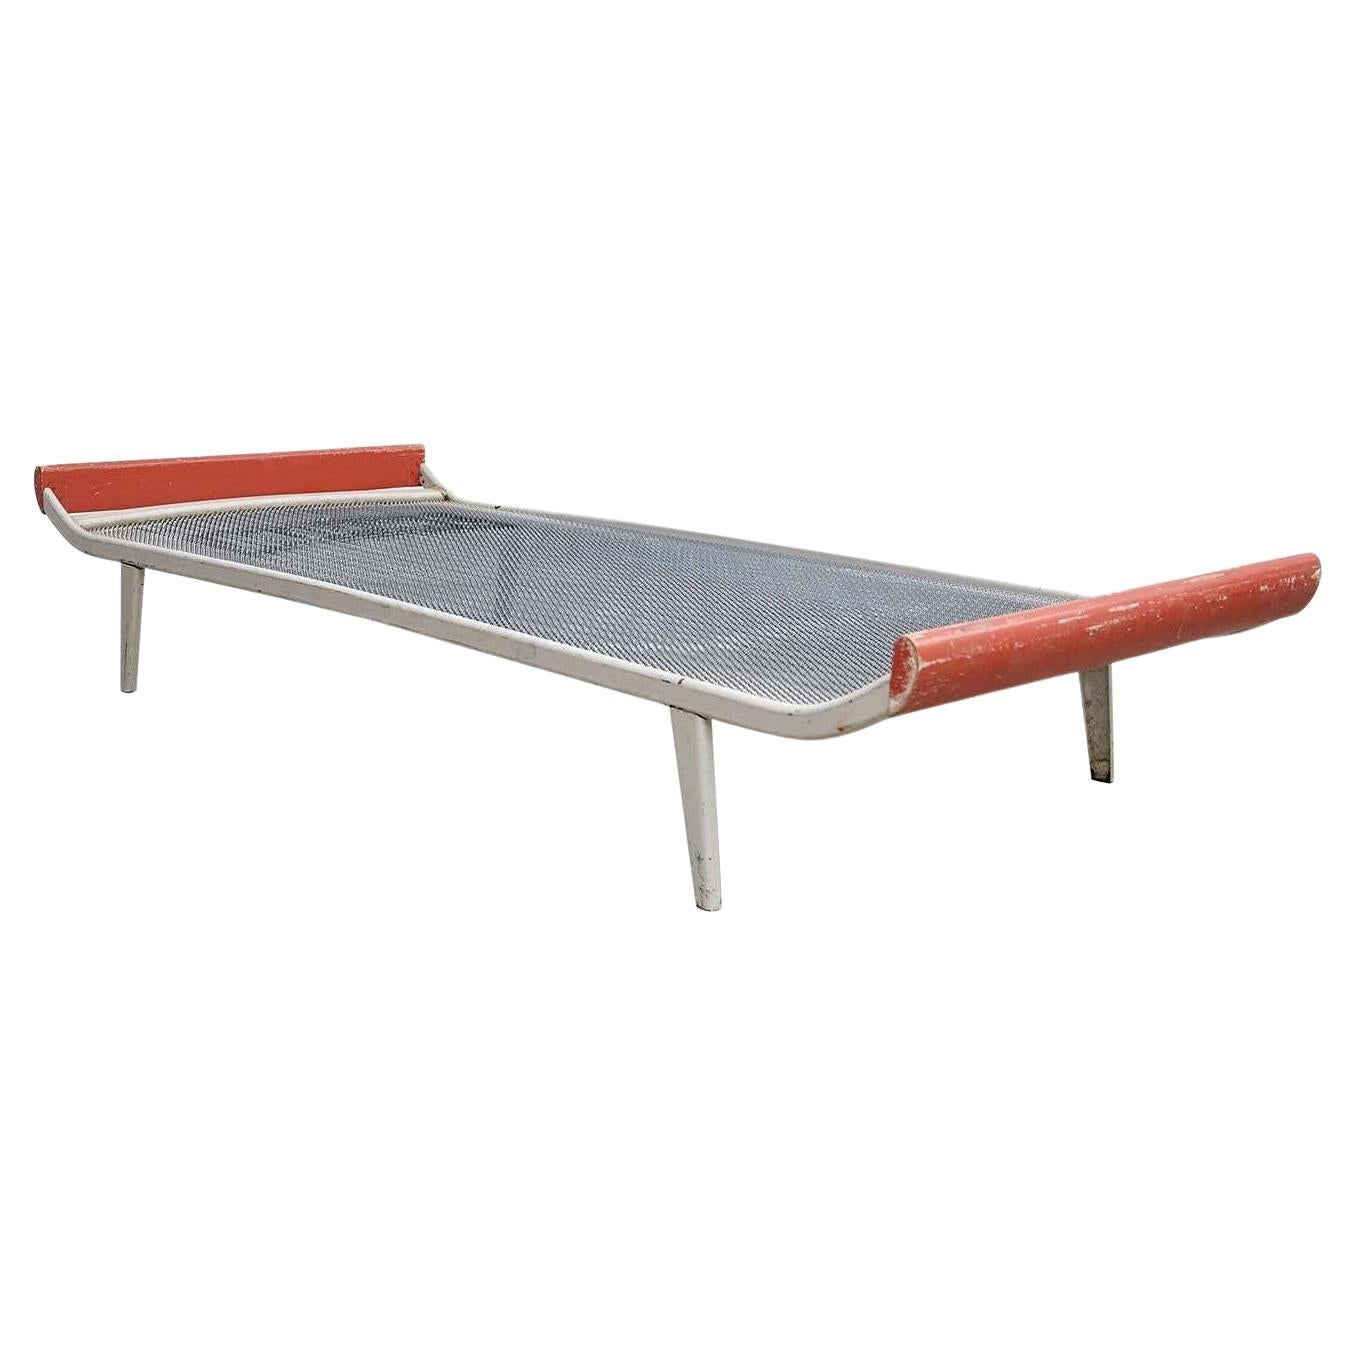 Dick Cordemeijer Mid-Century Modern Metal and Wood Daybed Cleopatra, circa 1950